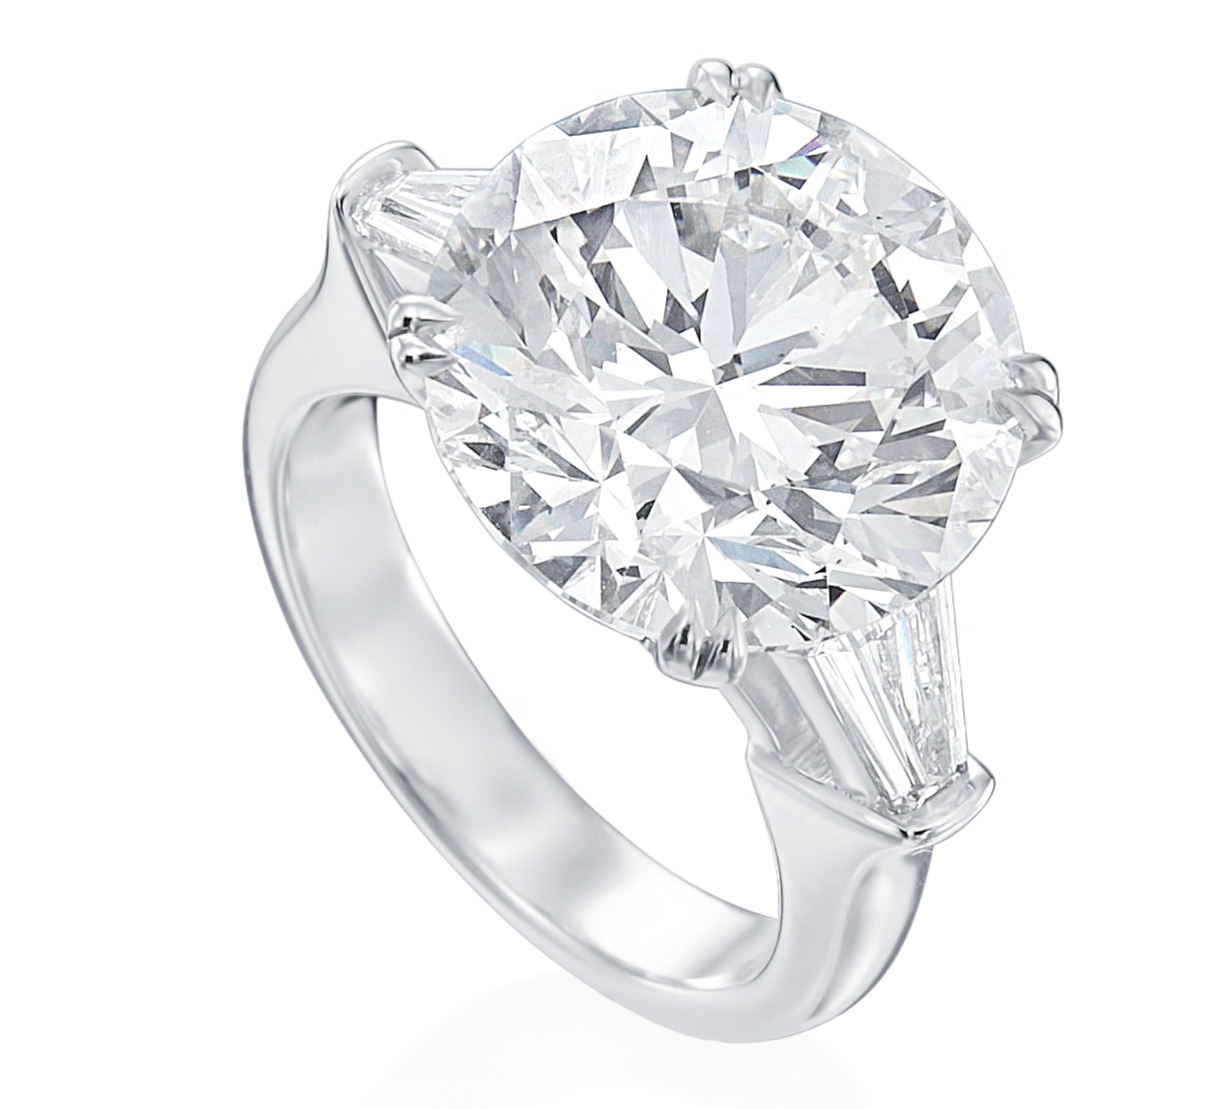 Korman Signature Platinum 11.13ct Round Center Stone with Tapered Baguette 3 Stone Engagement Ring